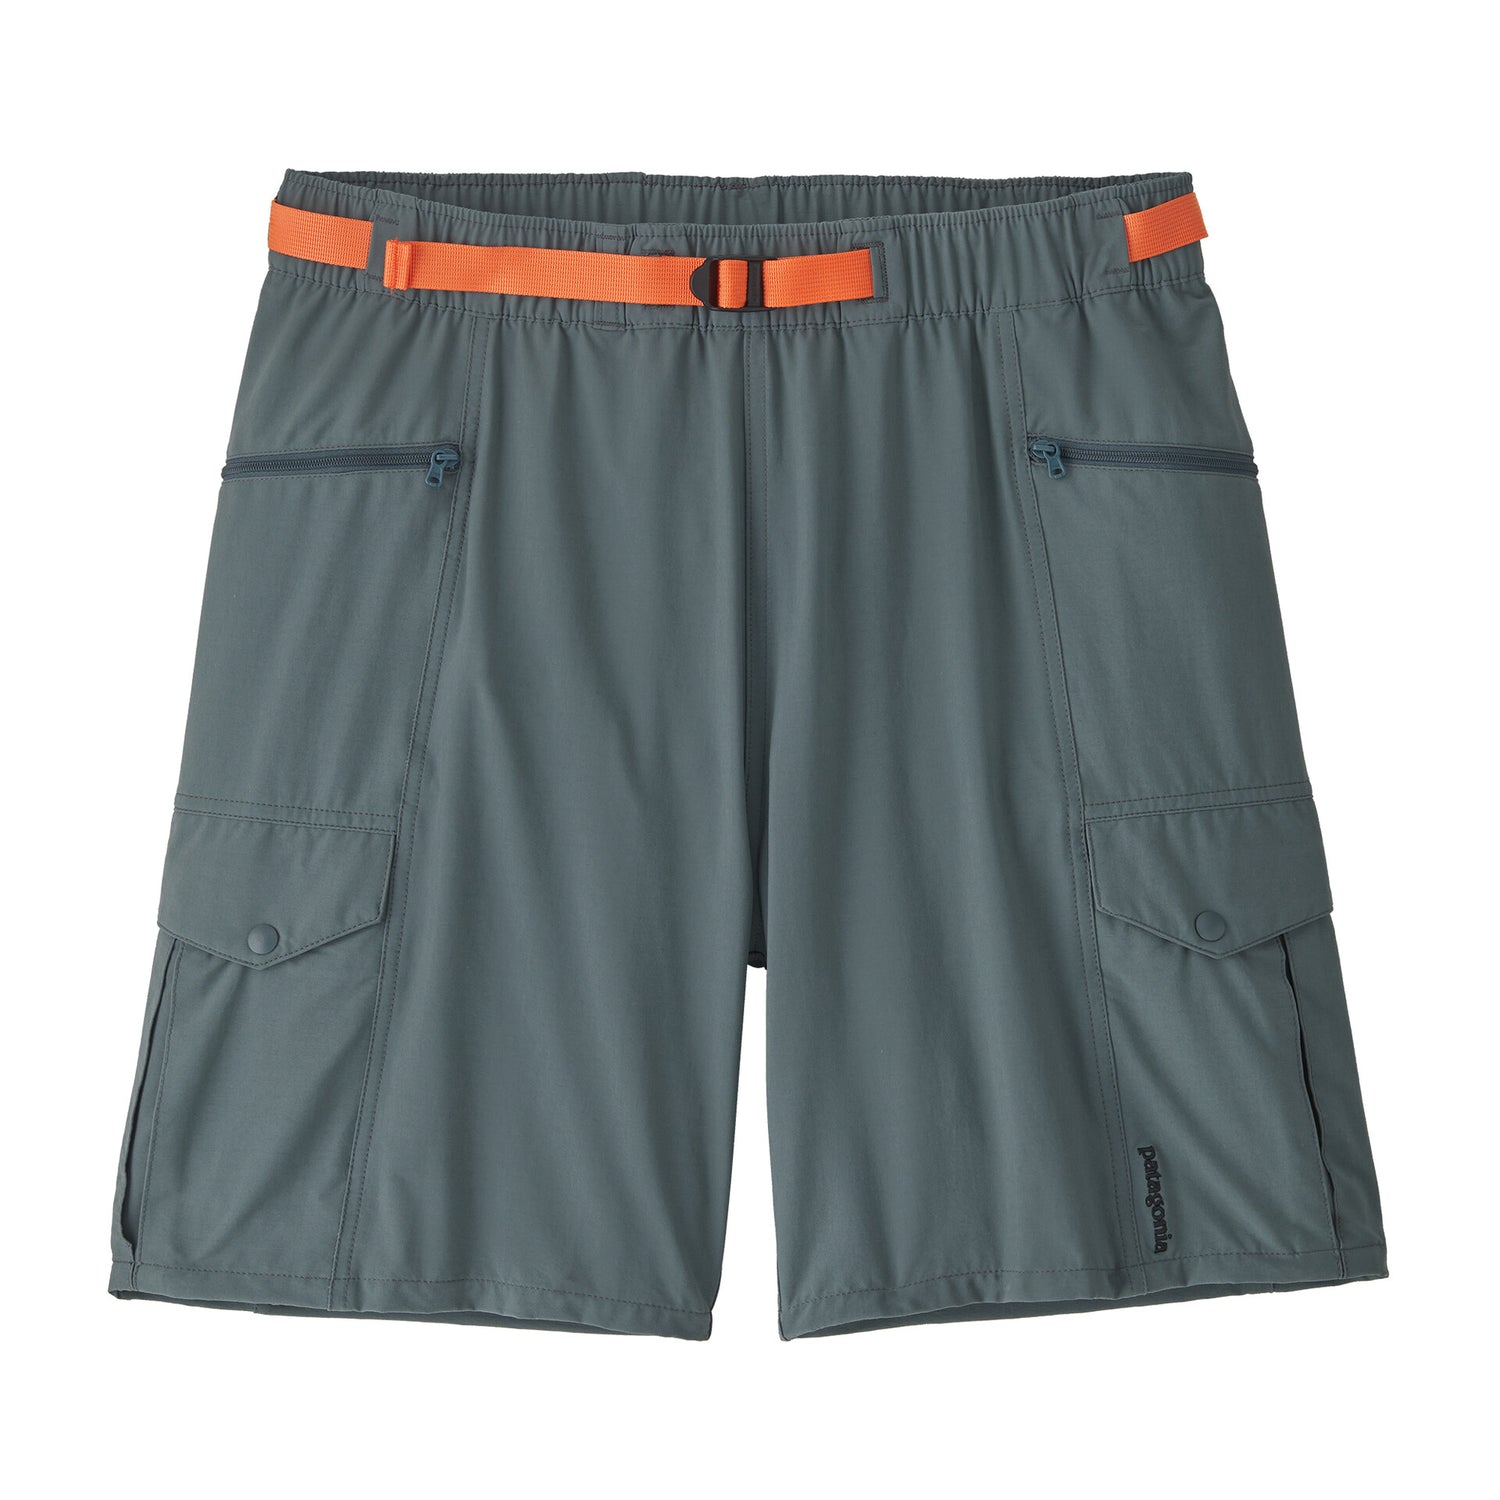 M'S OUTDOOR EVERYDAY SHORTS 7 INCH NOUVEAU GREEN